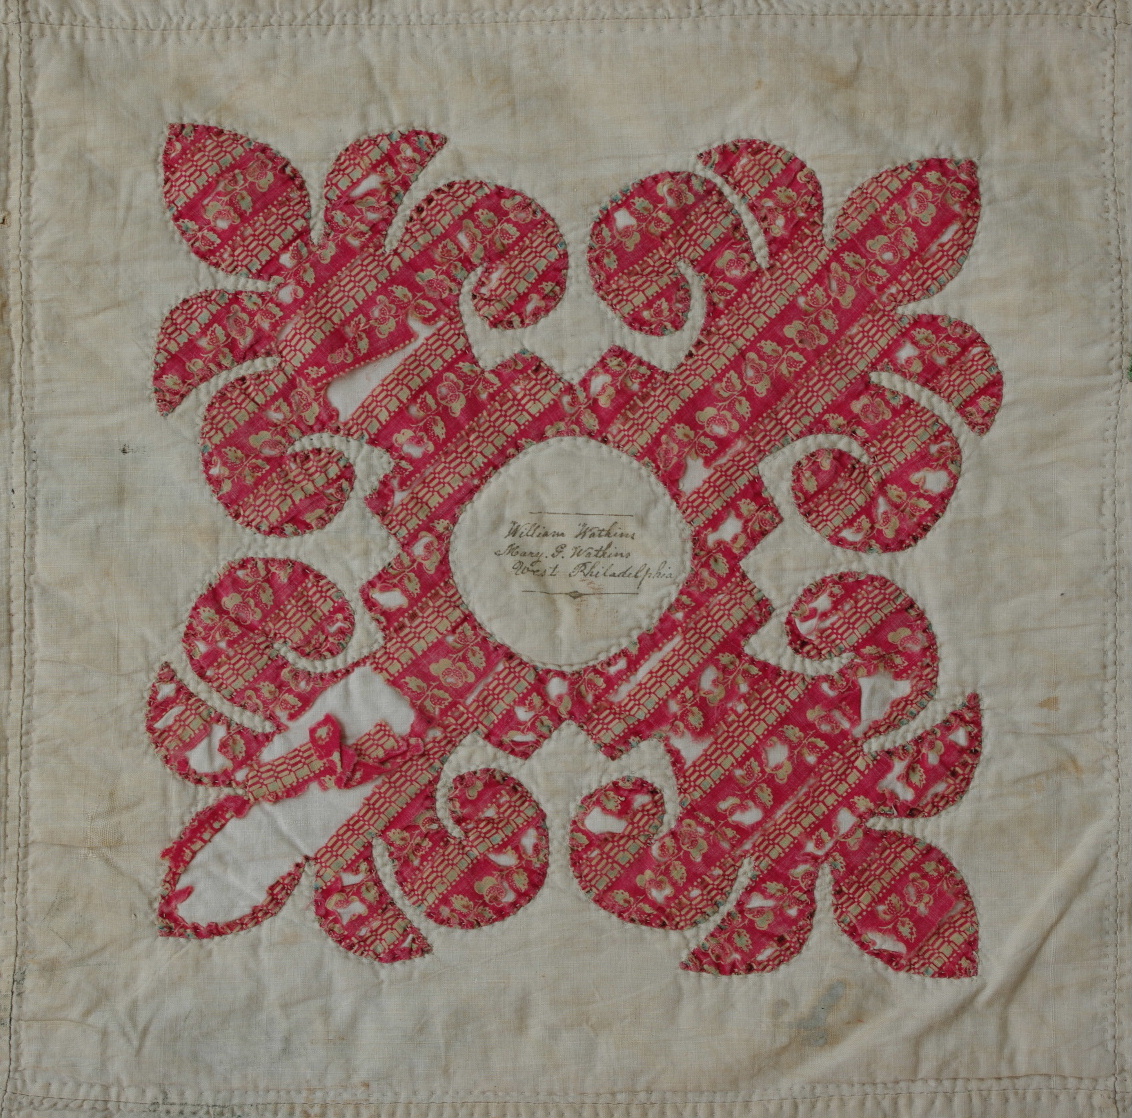 The Chester County Criswell Quilt: Photos of Rachel Dickey's Block